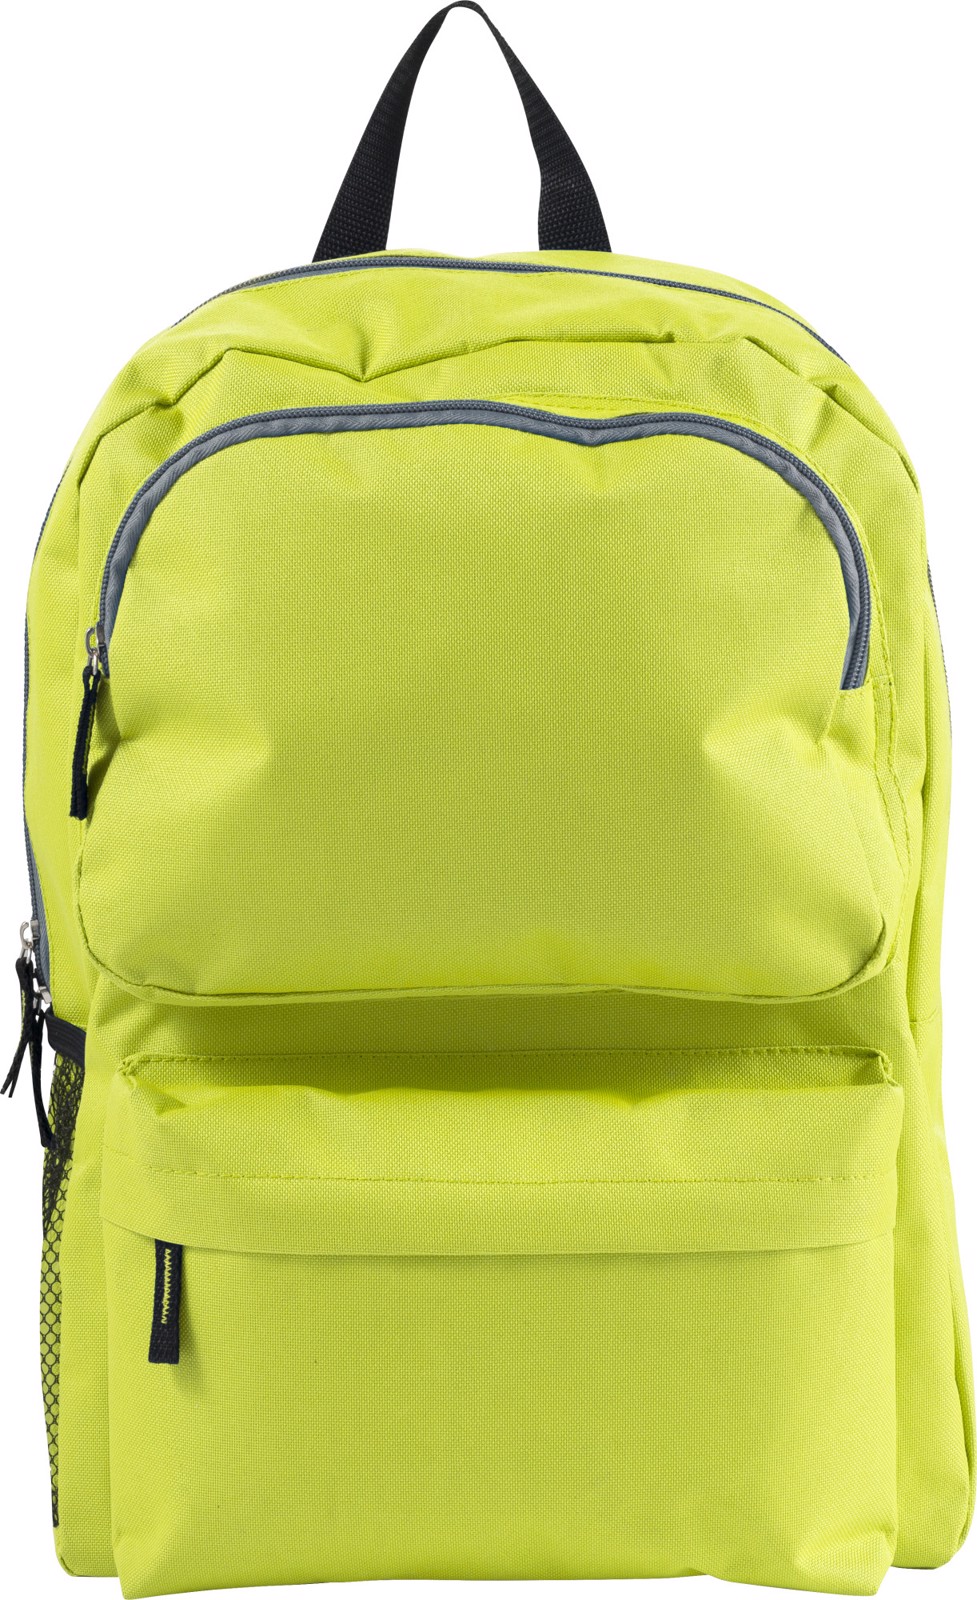 Polyester (600D) backpack - Lime